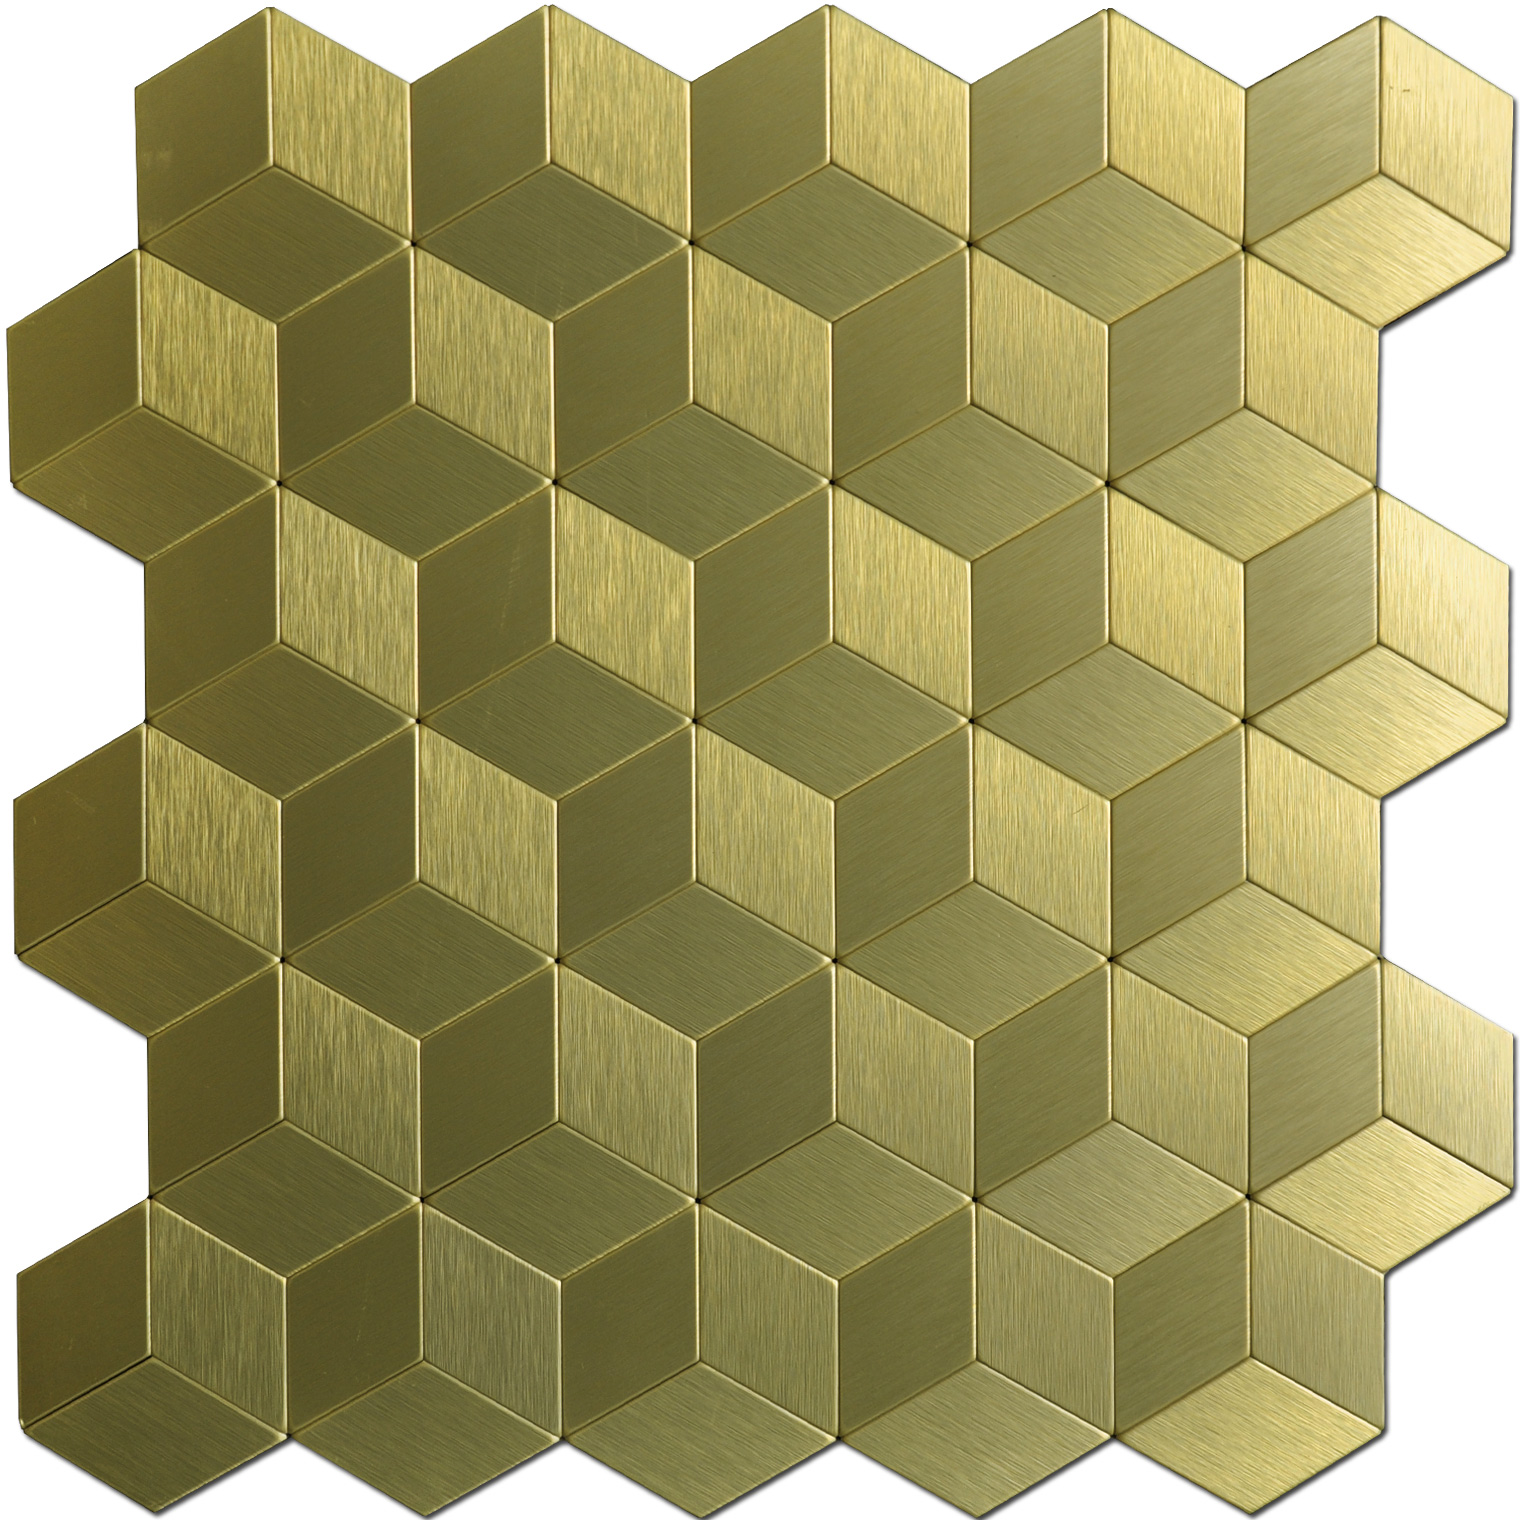 A16063 - 12x12In Gold Cube Metal Decorative Tile Peel N Stick Mosaic 10 Sheets